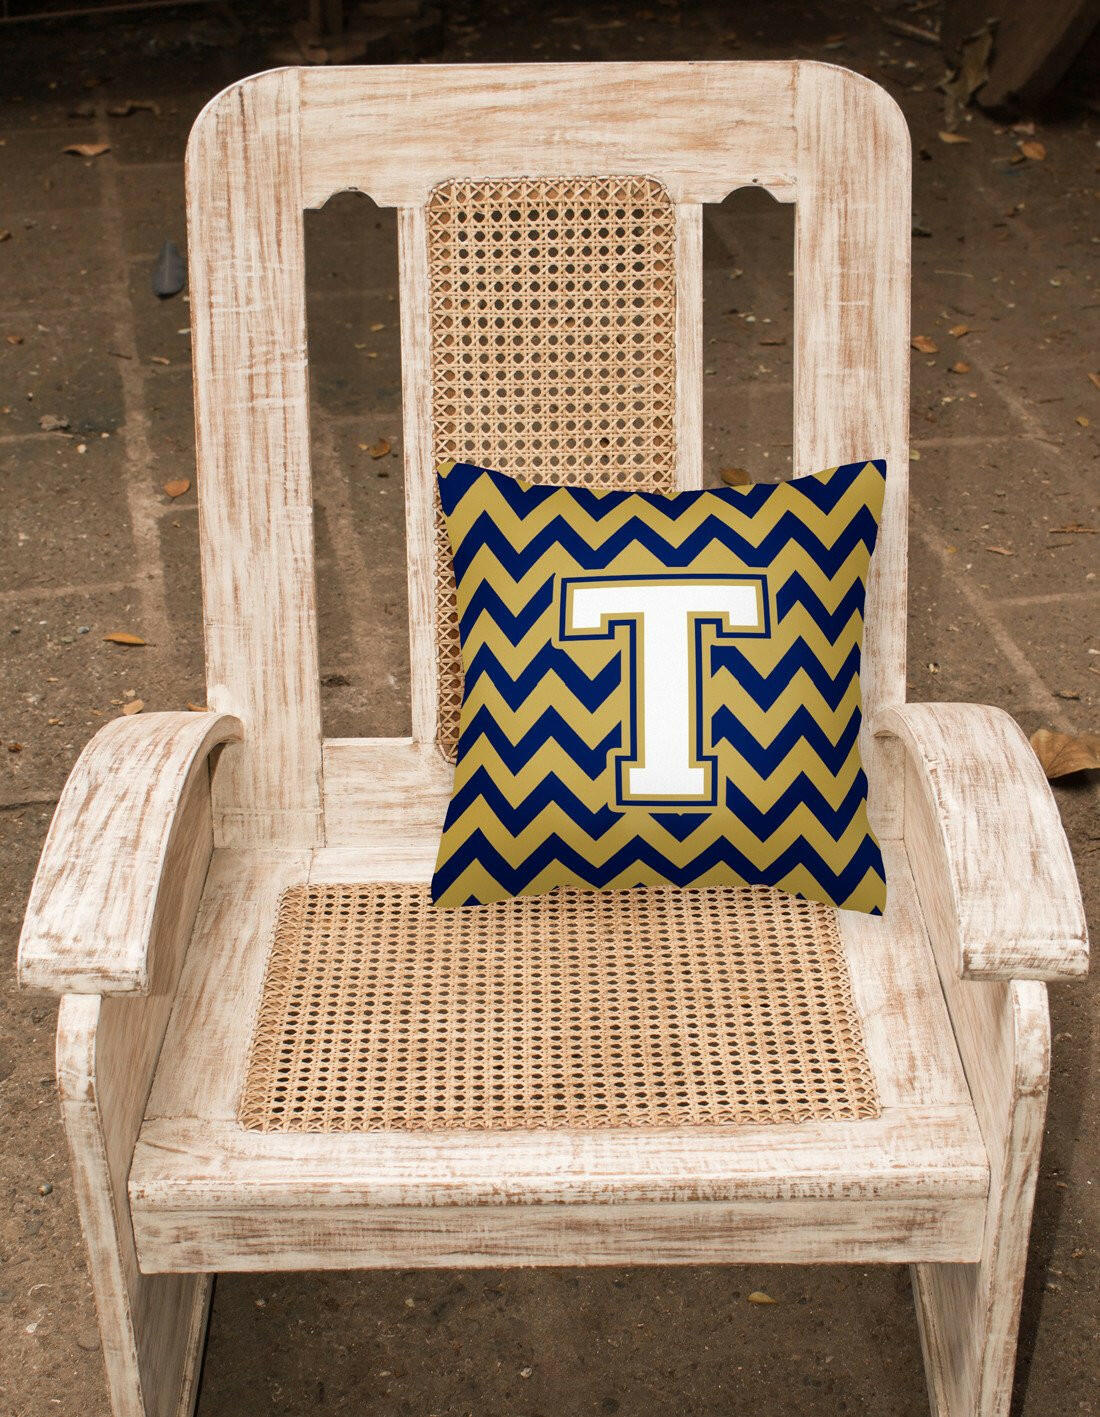 Letter T Chevron Navy Blue and Gold Fabric Decorative Pillow CJ1057-TPW1414 by Caroline's Treasures